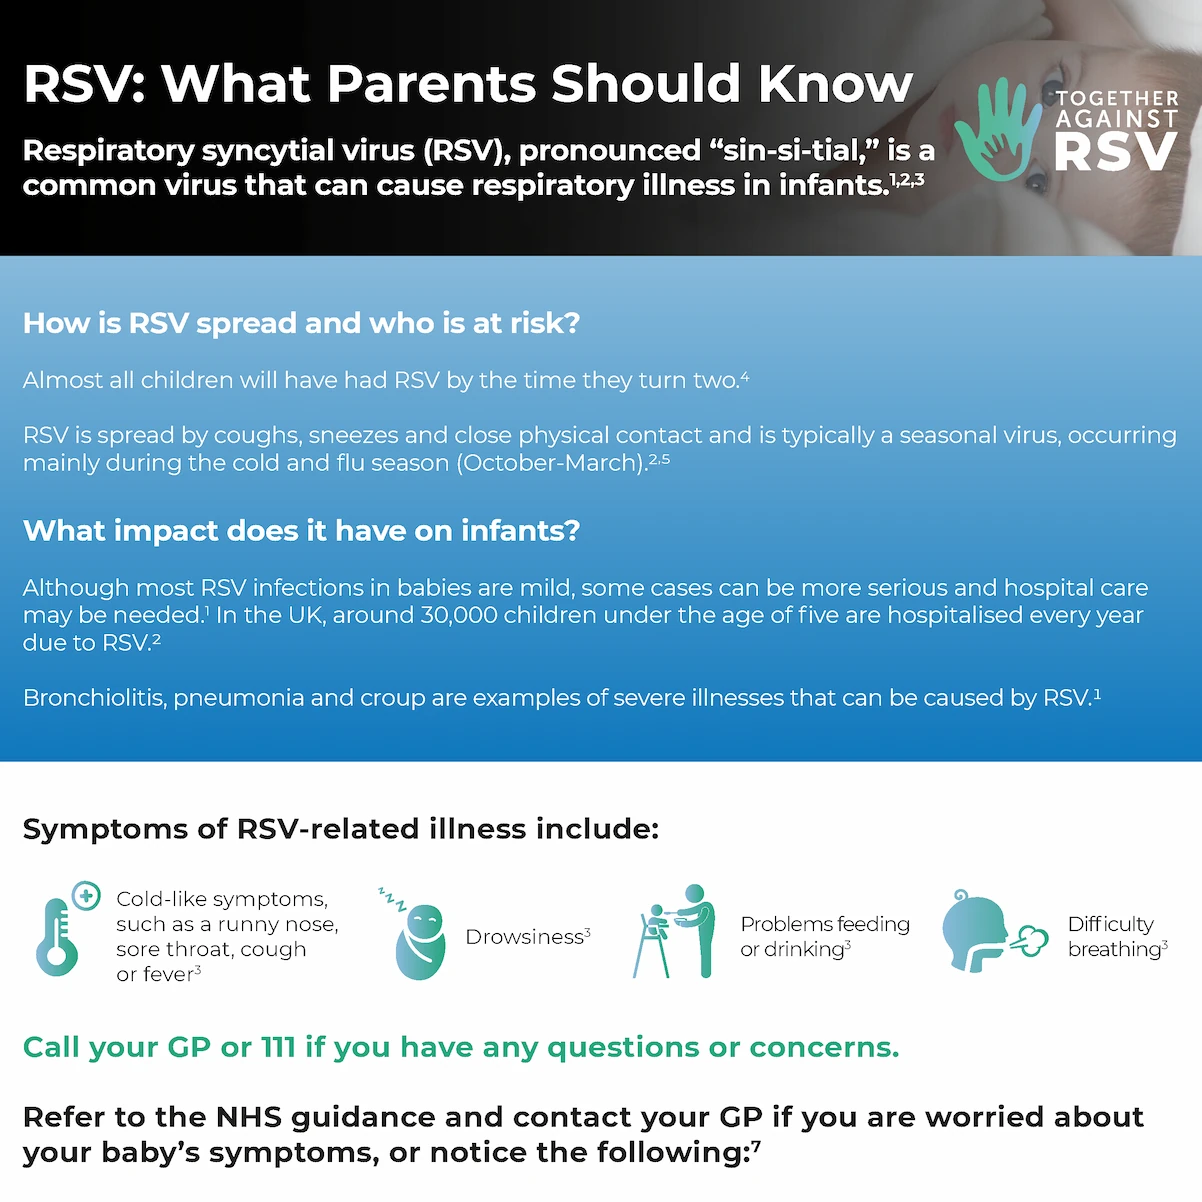 What parents should know poster